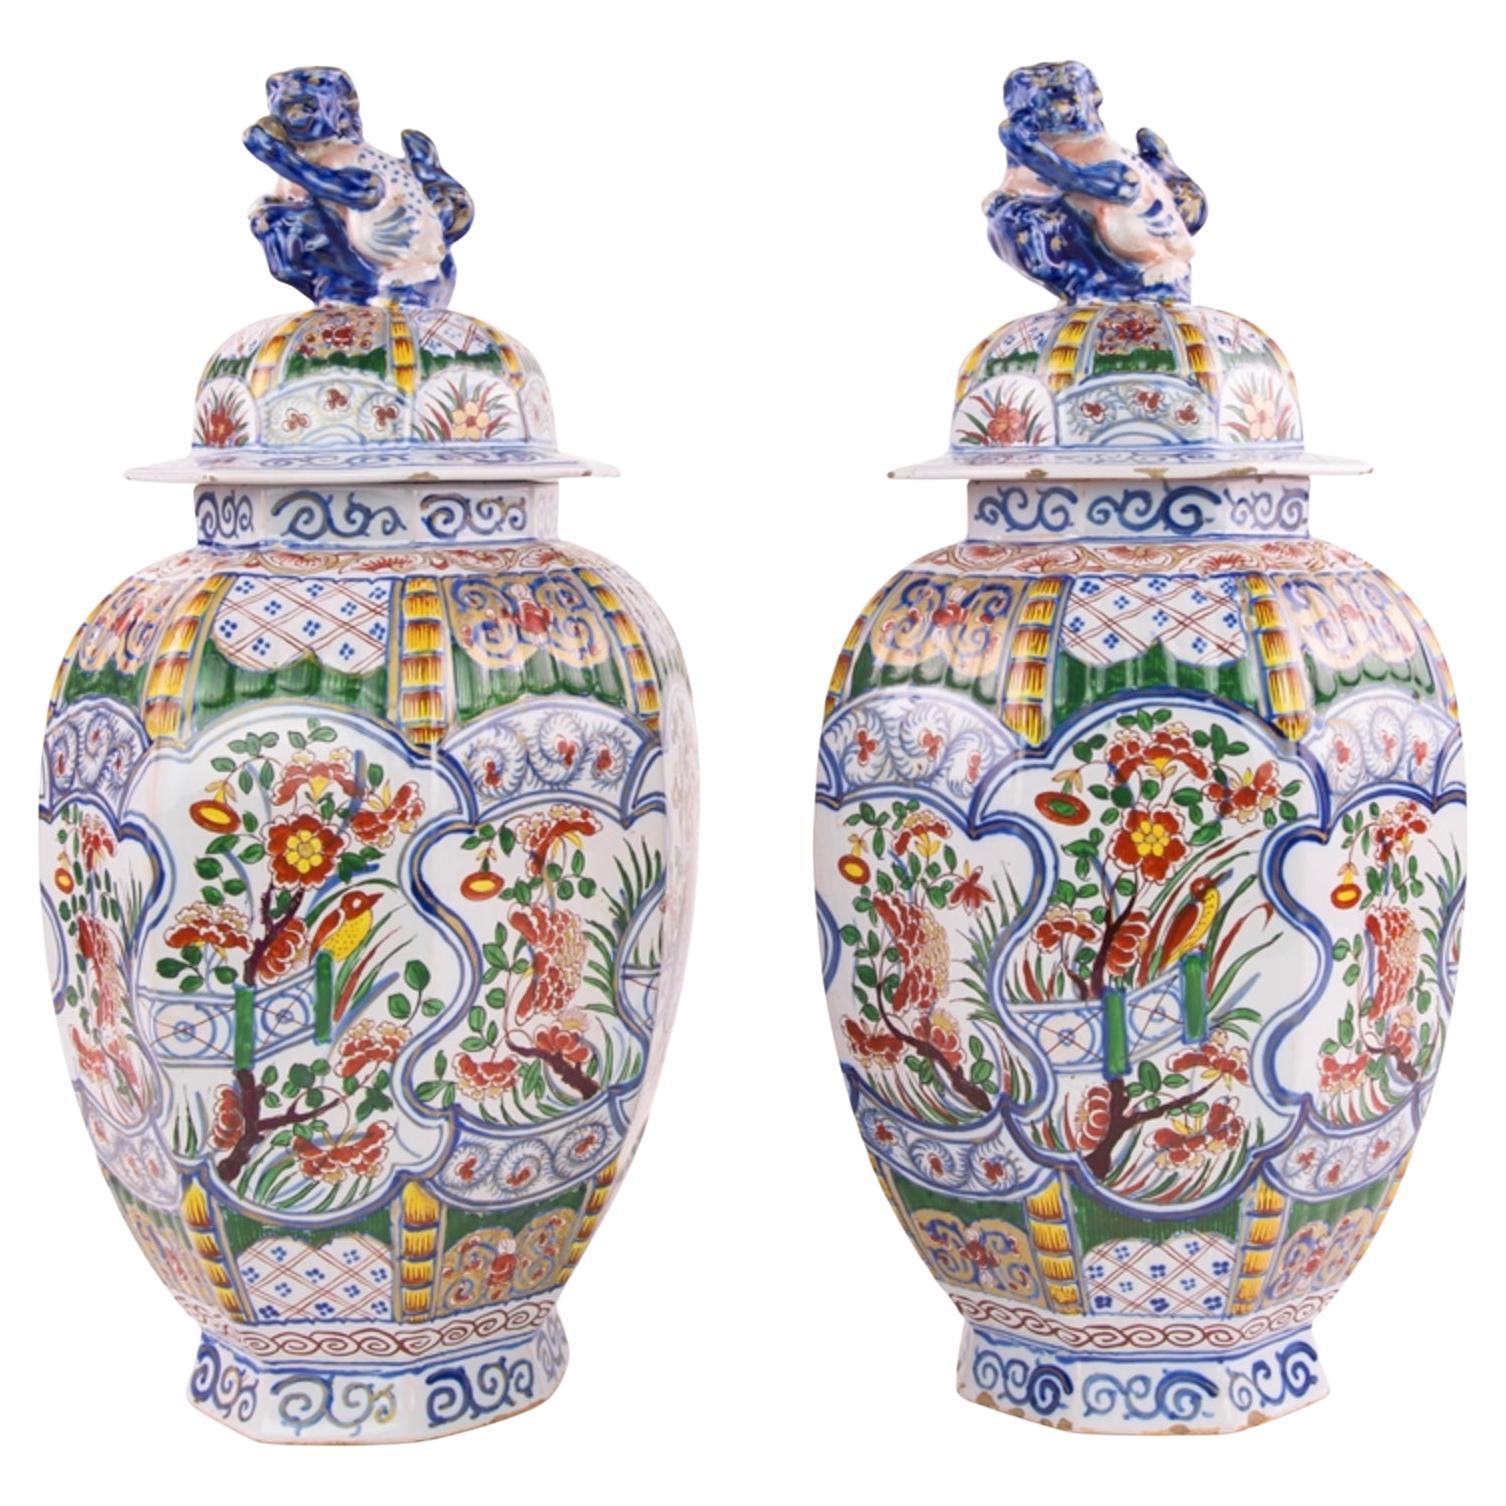 Pair of Early 20th Century Antique Delft Polychrome Vases with Covers